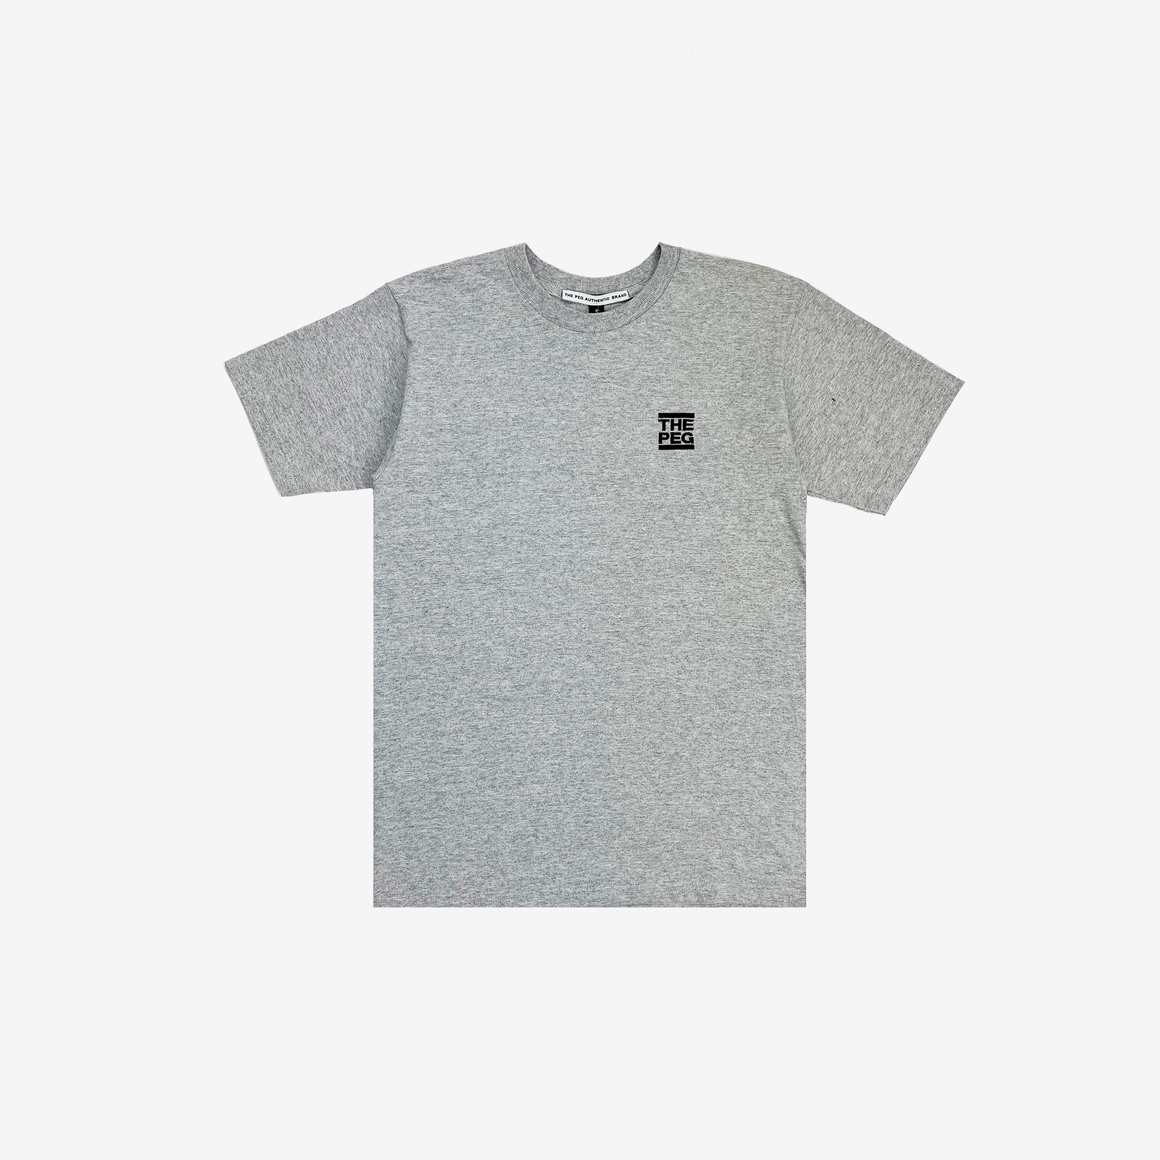 Embroidered Classic Tee Shirt (Heather Grey)